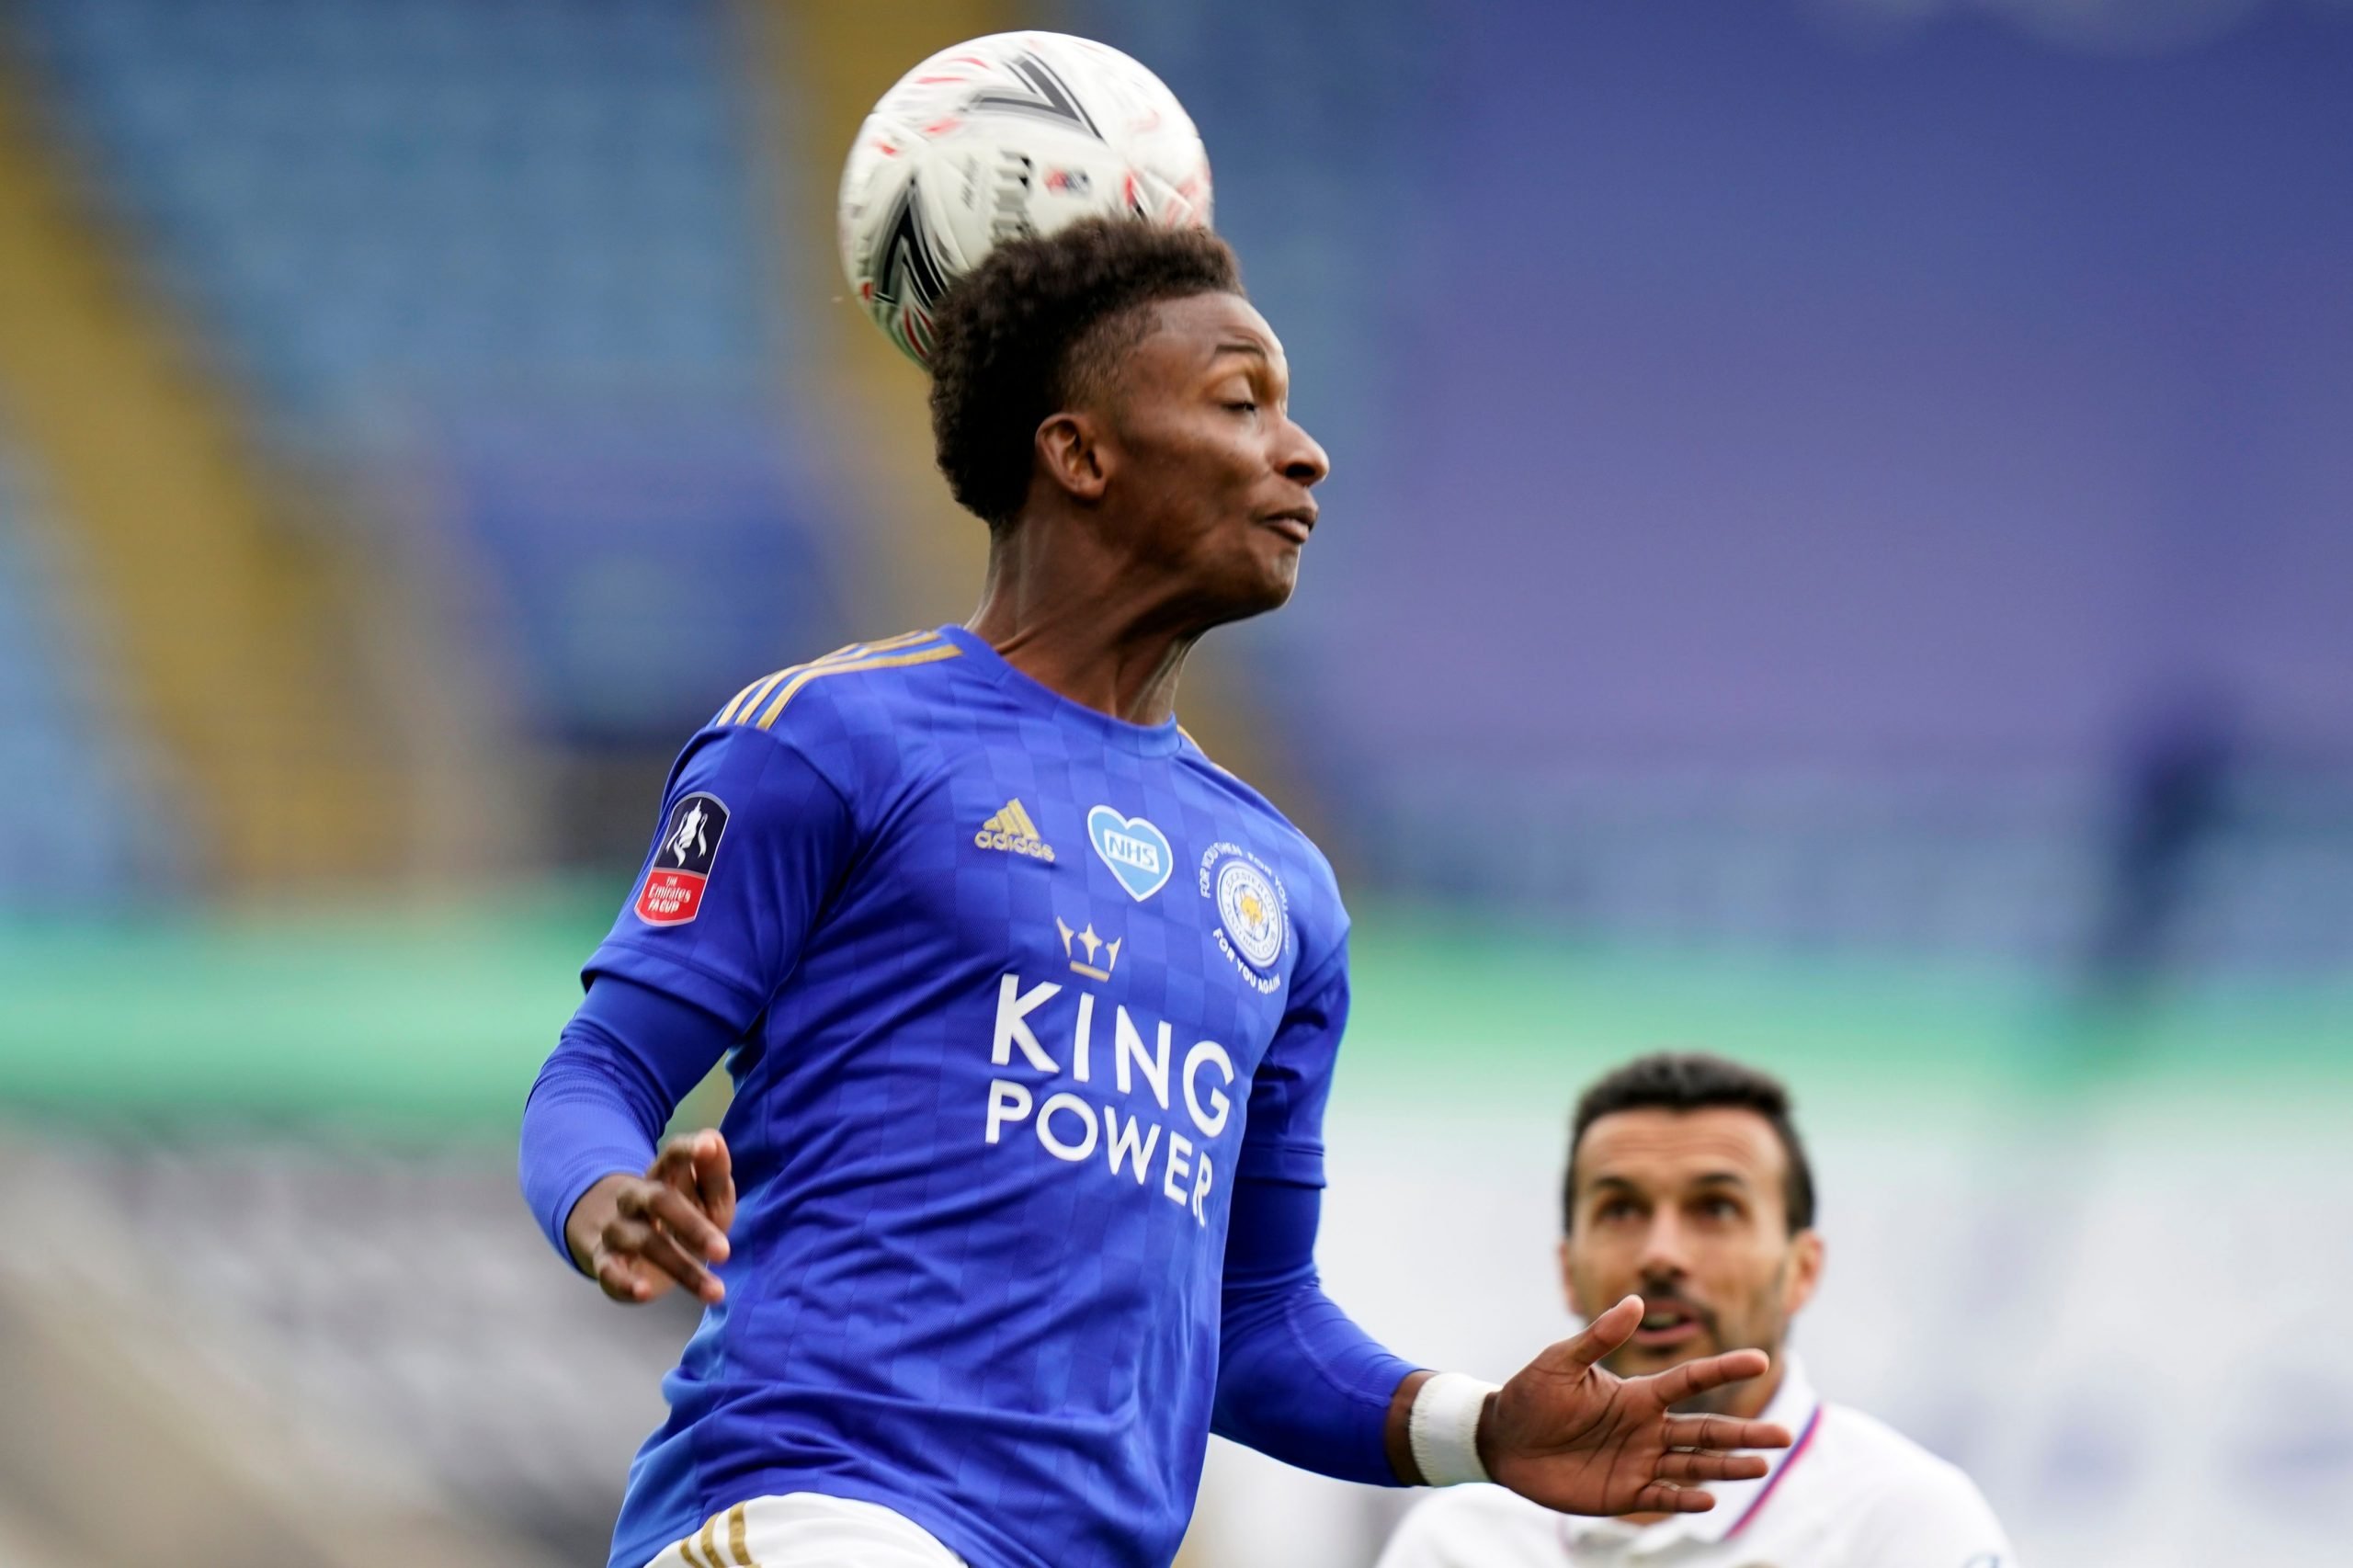 Everton could face heavy competition in pursuit of Demarai Gray who is seen in the photo